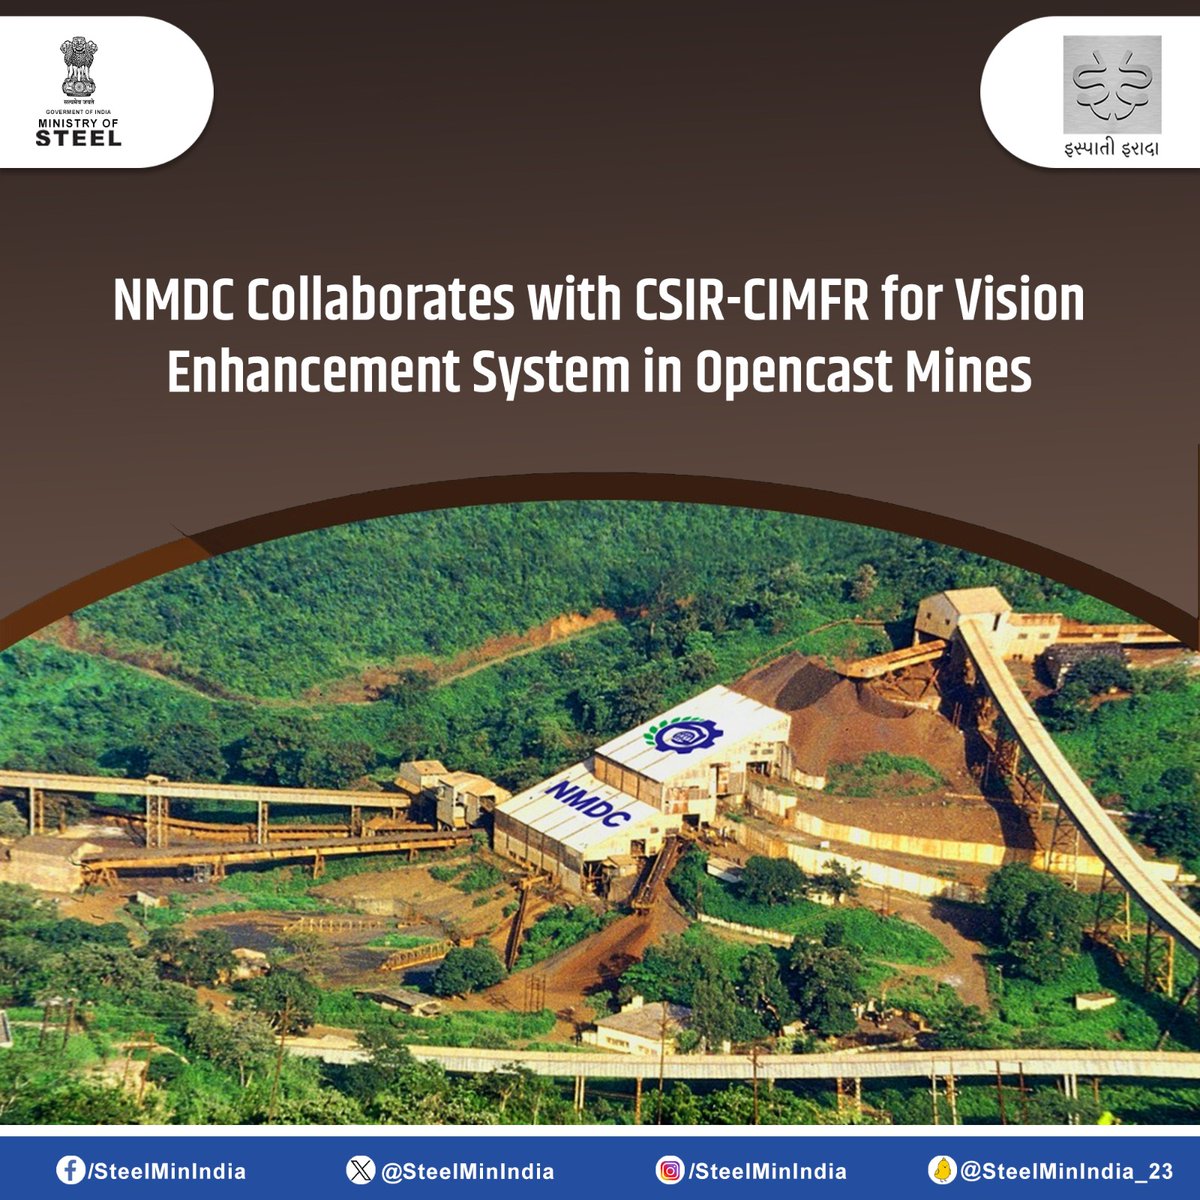 #NMDC teams up with CSIR-CIMFR to revolutionize opencast mining safety and productivity with an innovative Vision Enhancement System, ensuring uninterrupted operations in adverse weather.

#MiningInnovation #SafetyFirst #ResponsibleMining #VisionEnhancementSystem